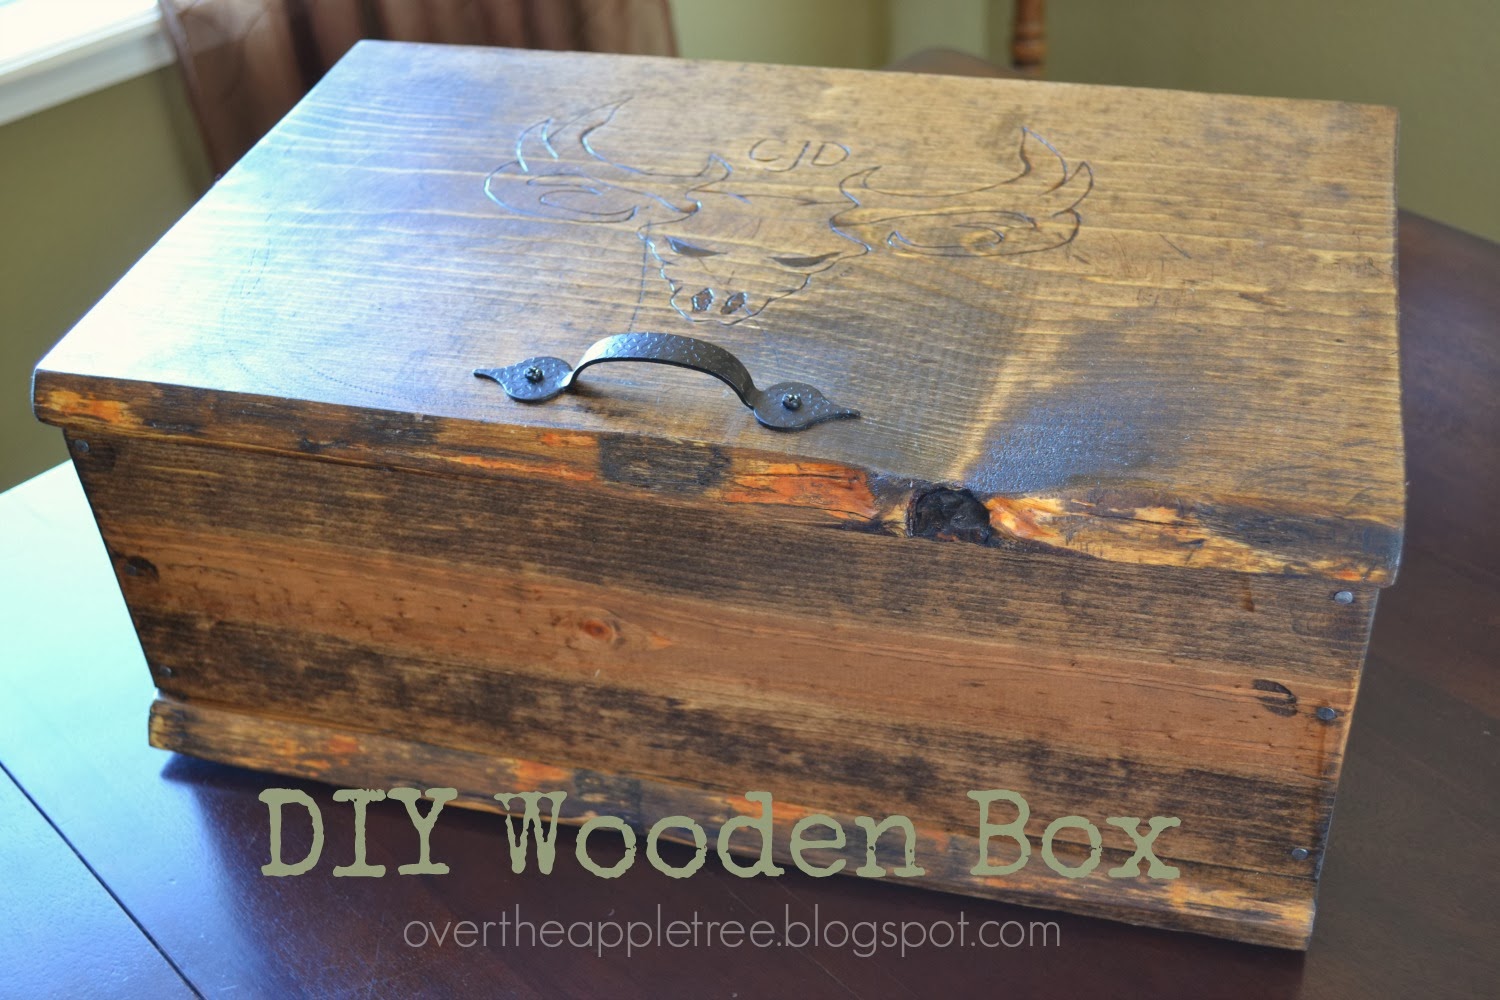 Over The Apple Tree: DIY Wooden Box